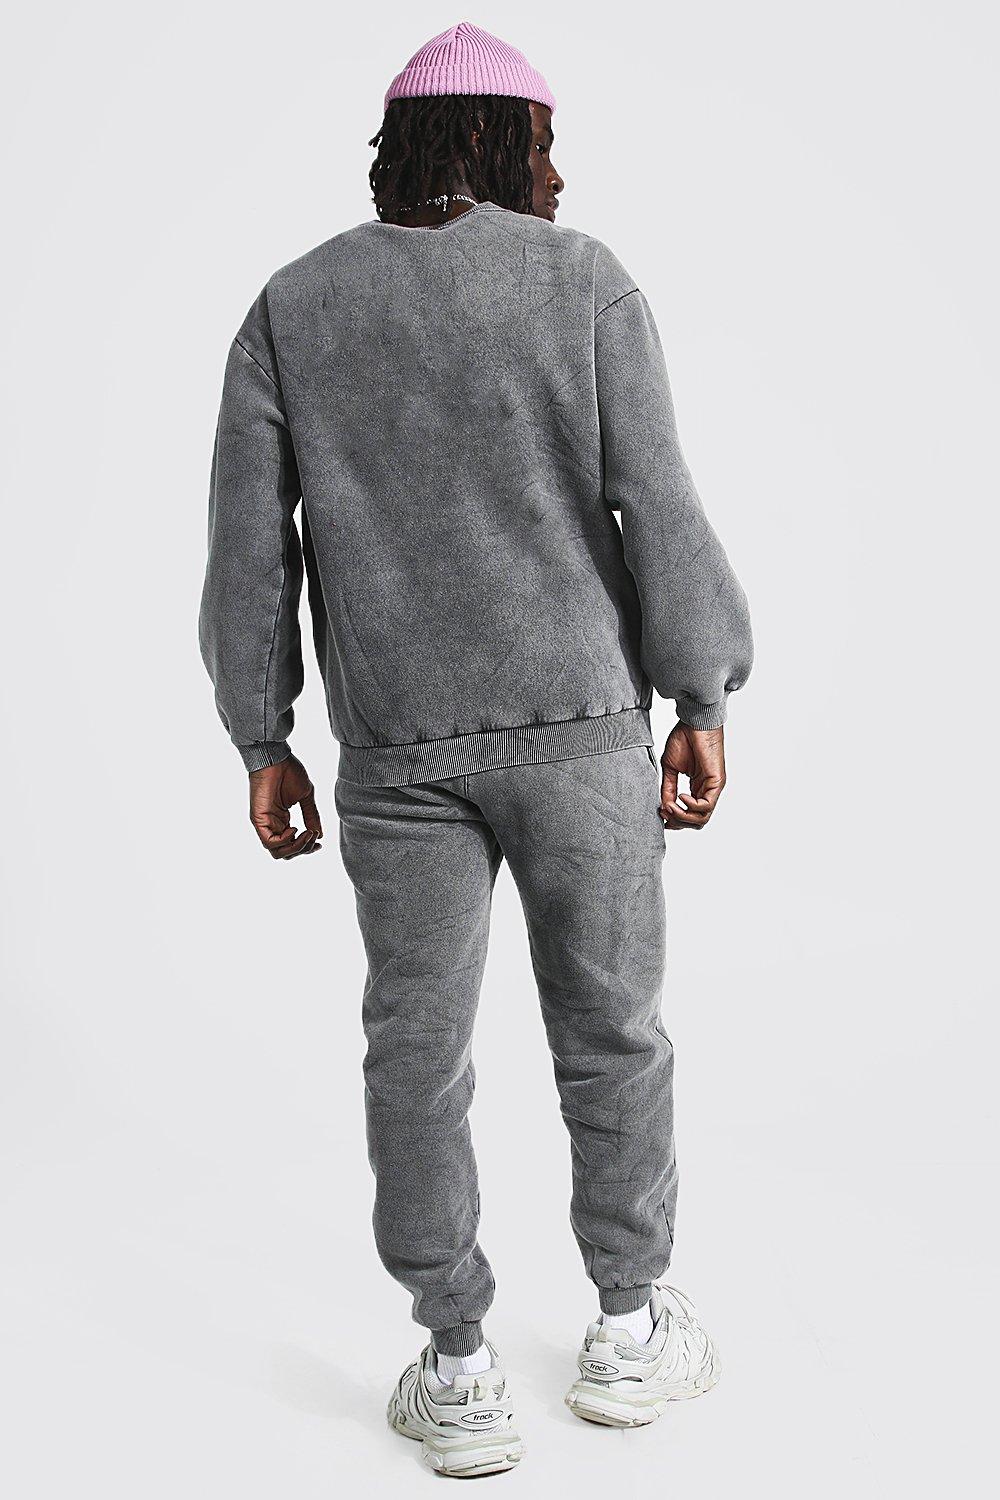 Man Active Fleece Hoodie And Jogger Tracksuit